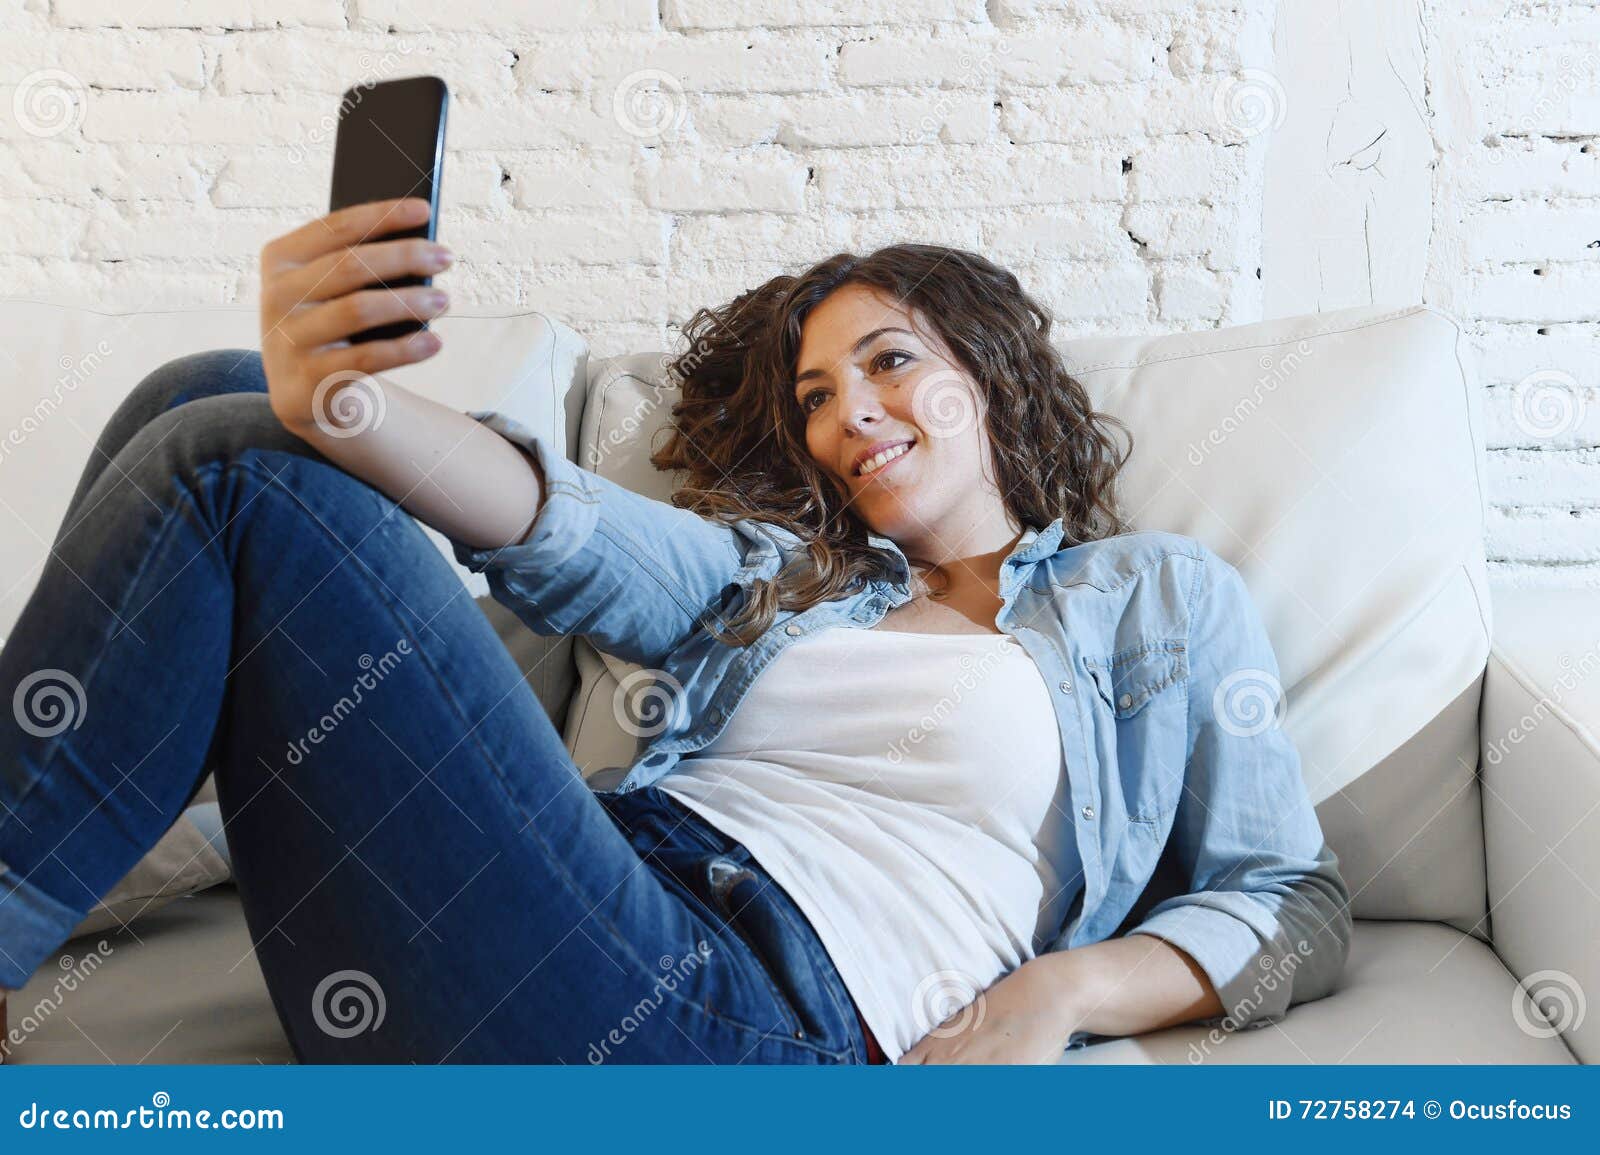 Young Attractive Hispanic Woman Lying On Home Couch Taking Selfie Photo 